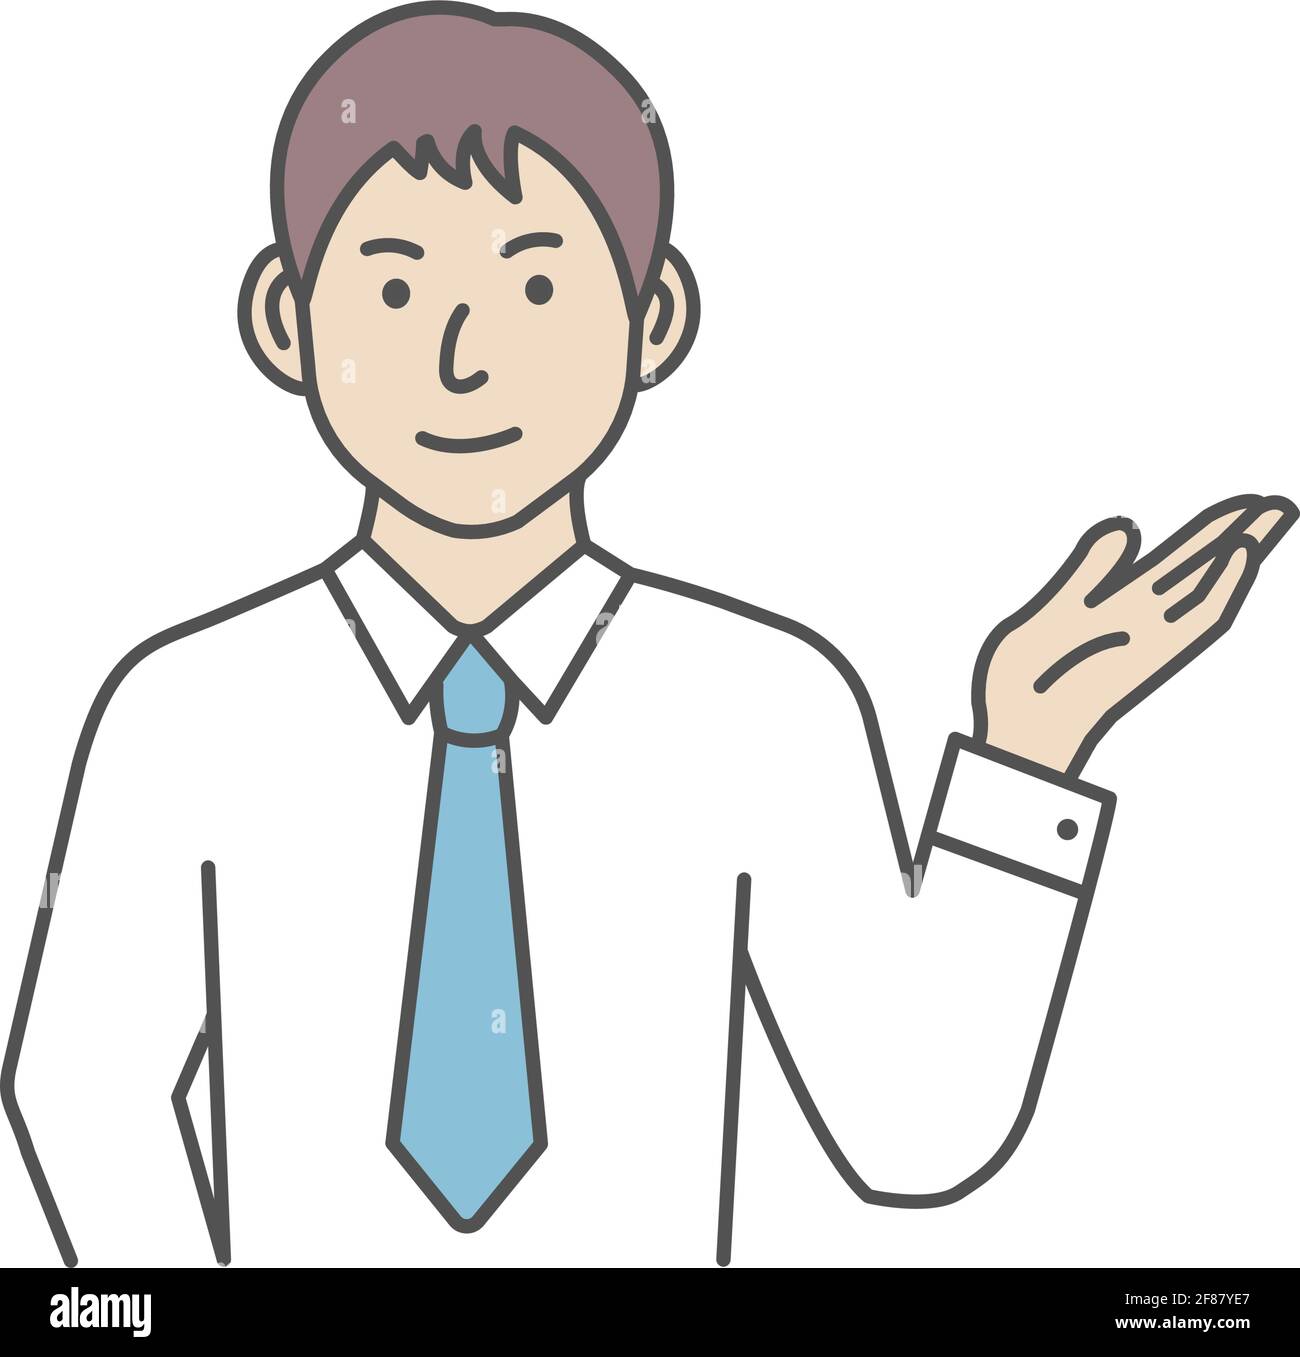 Vector illustration of a young businessman introducing or navigating Stock Vector